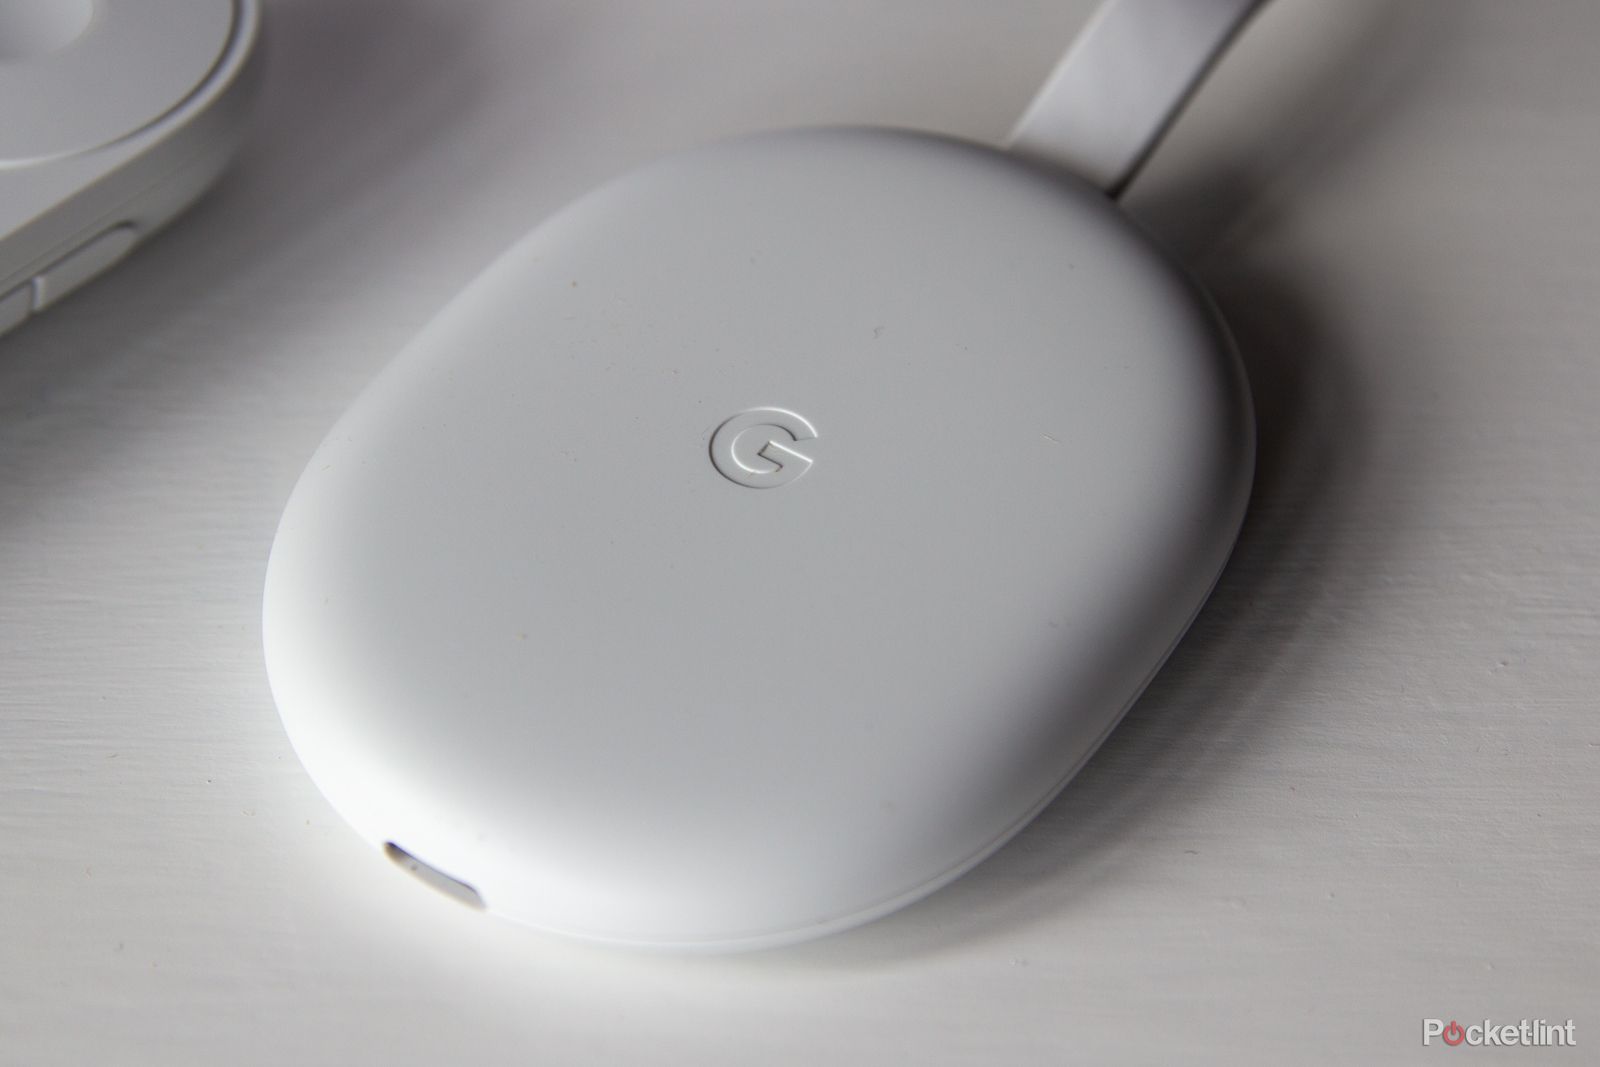 New Google device pops up at FCC: Is it a cheaper Chromecast? photo 2